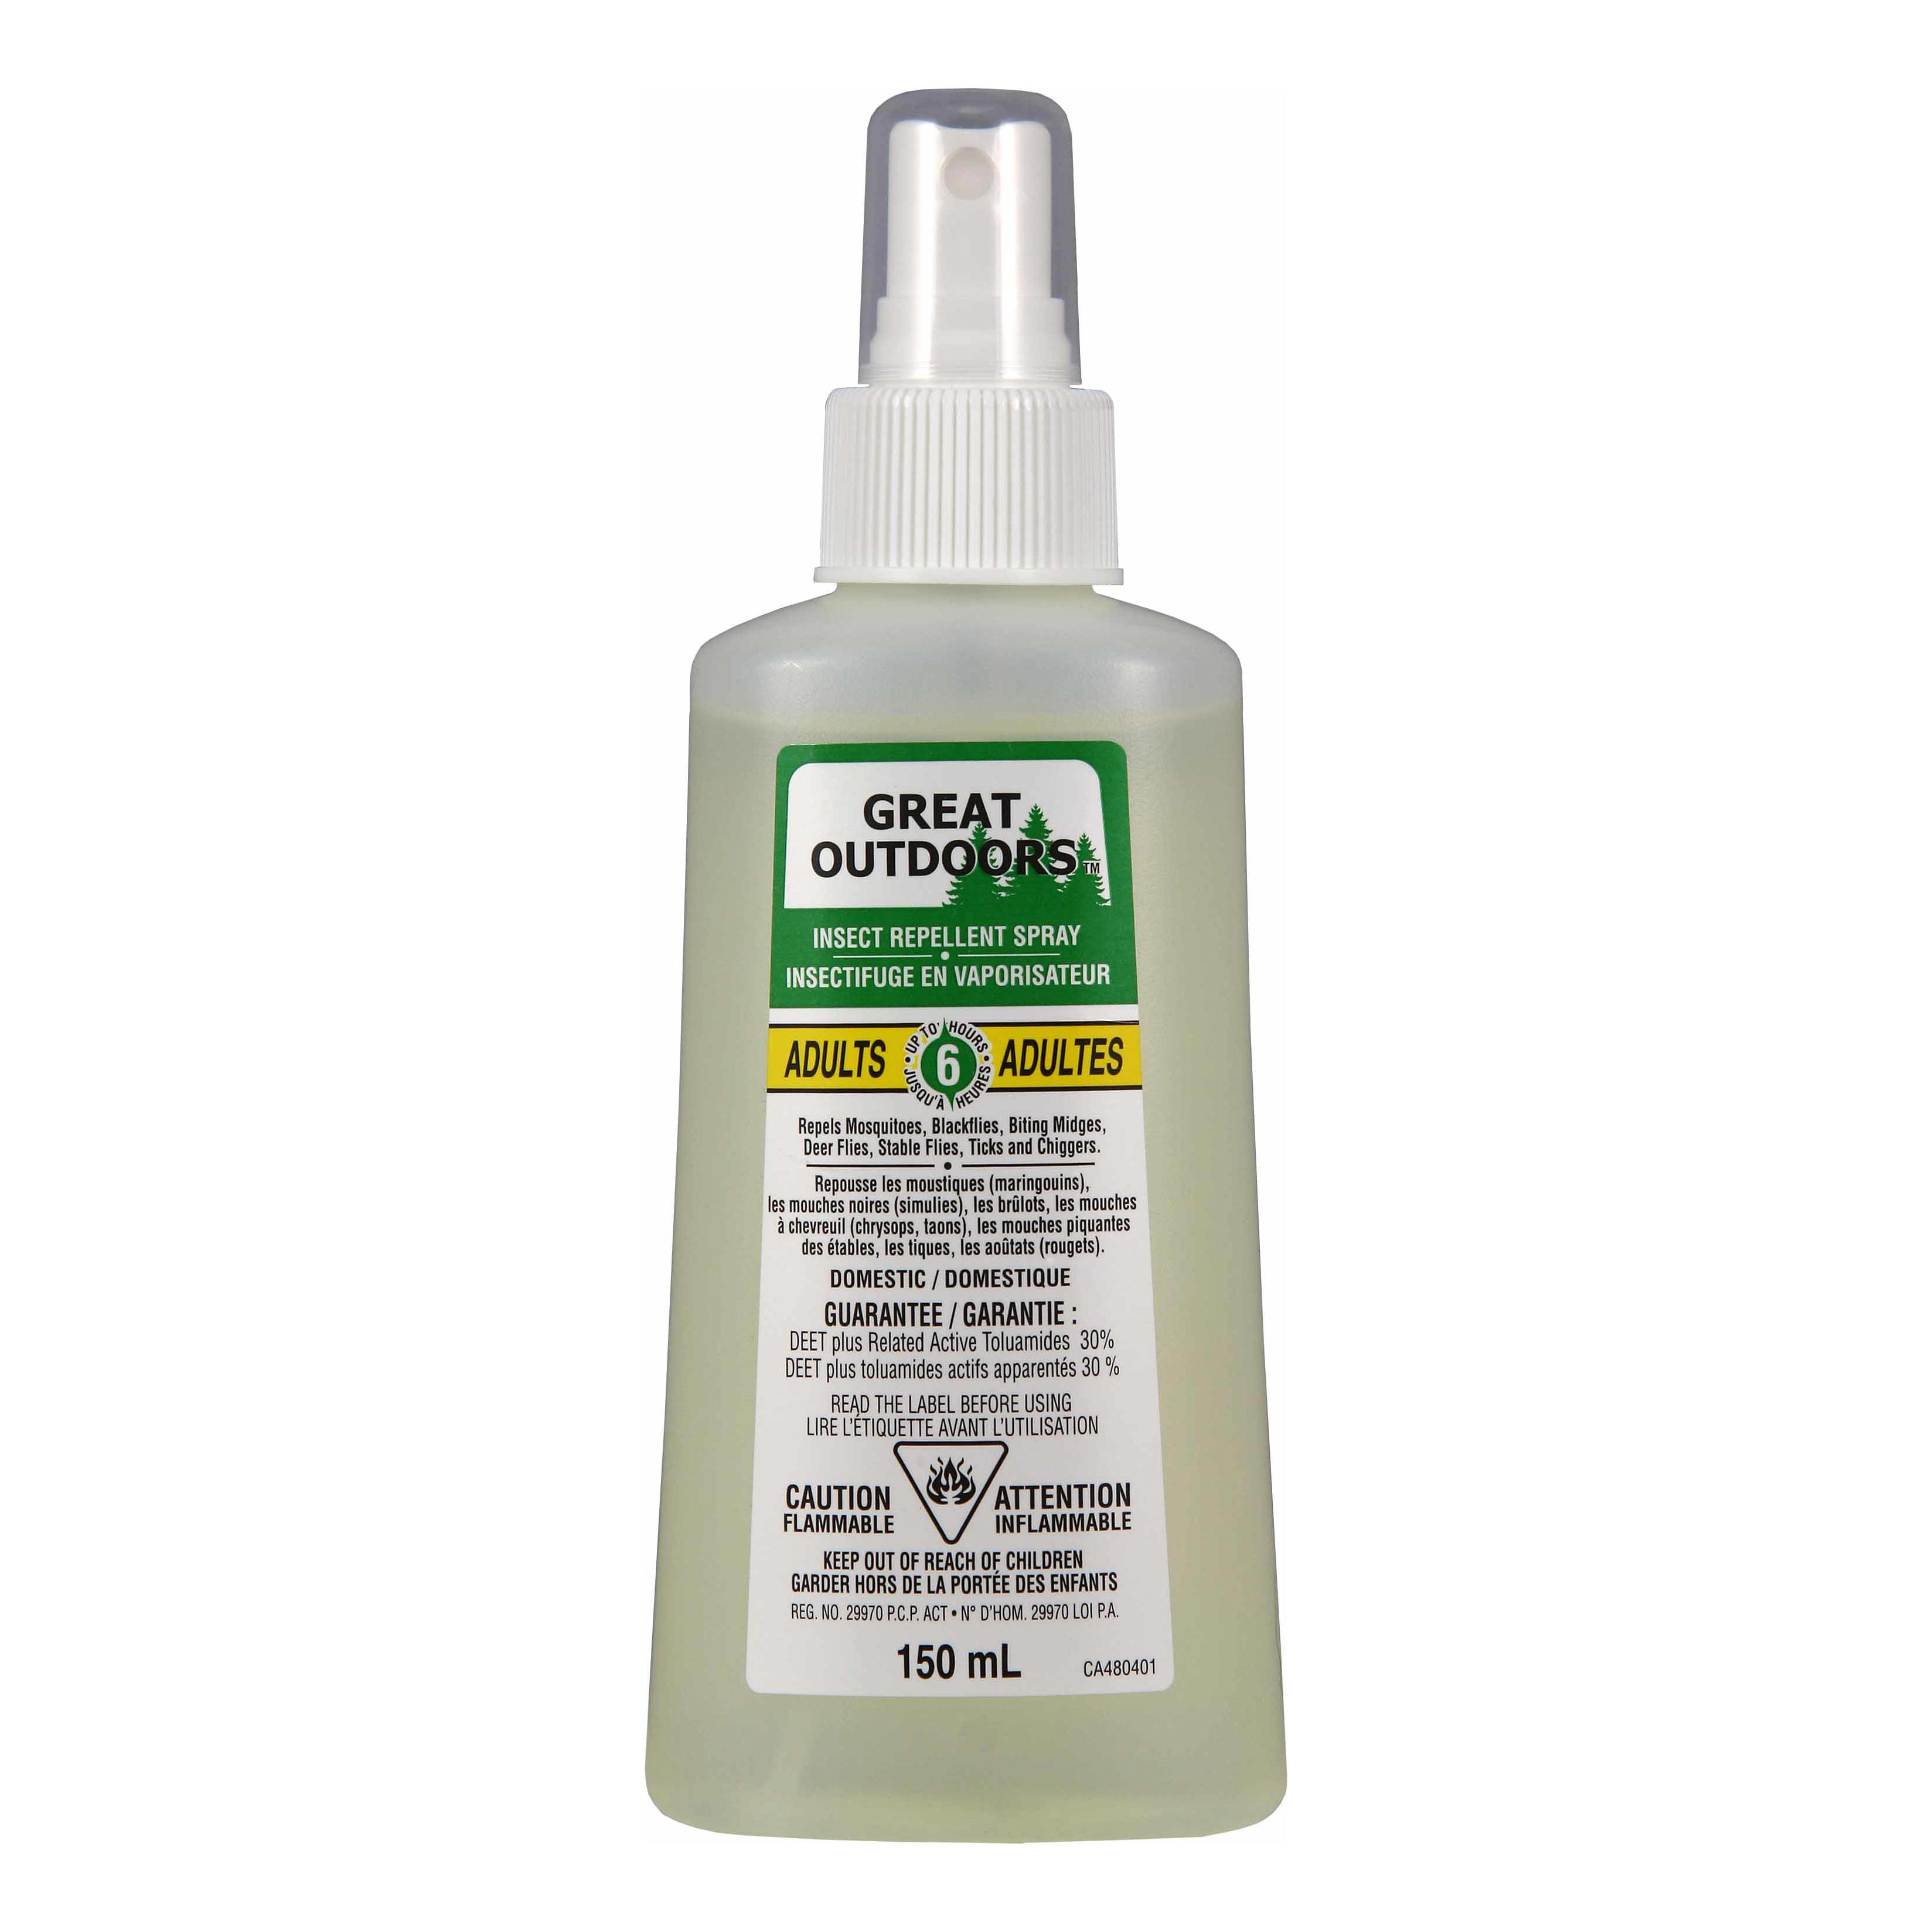 Great Outdoors Insect Repellent Adult Spray